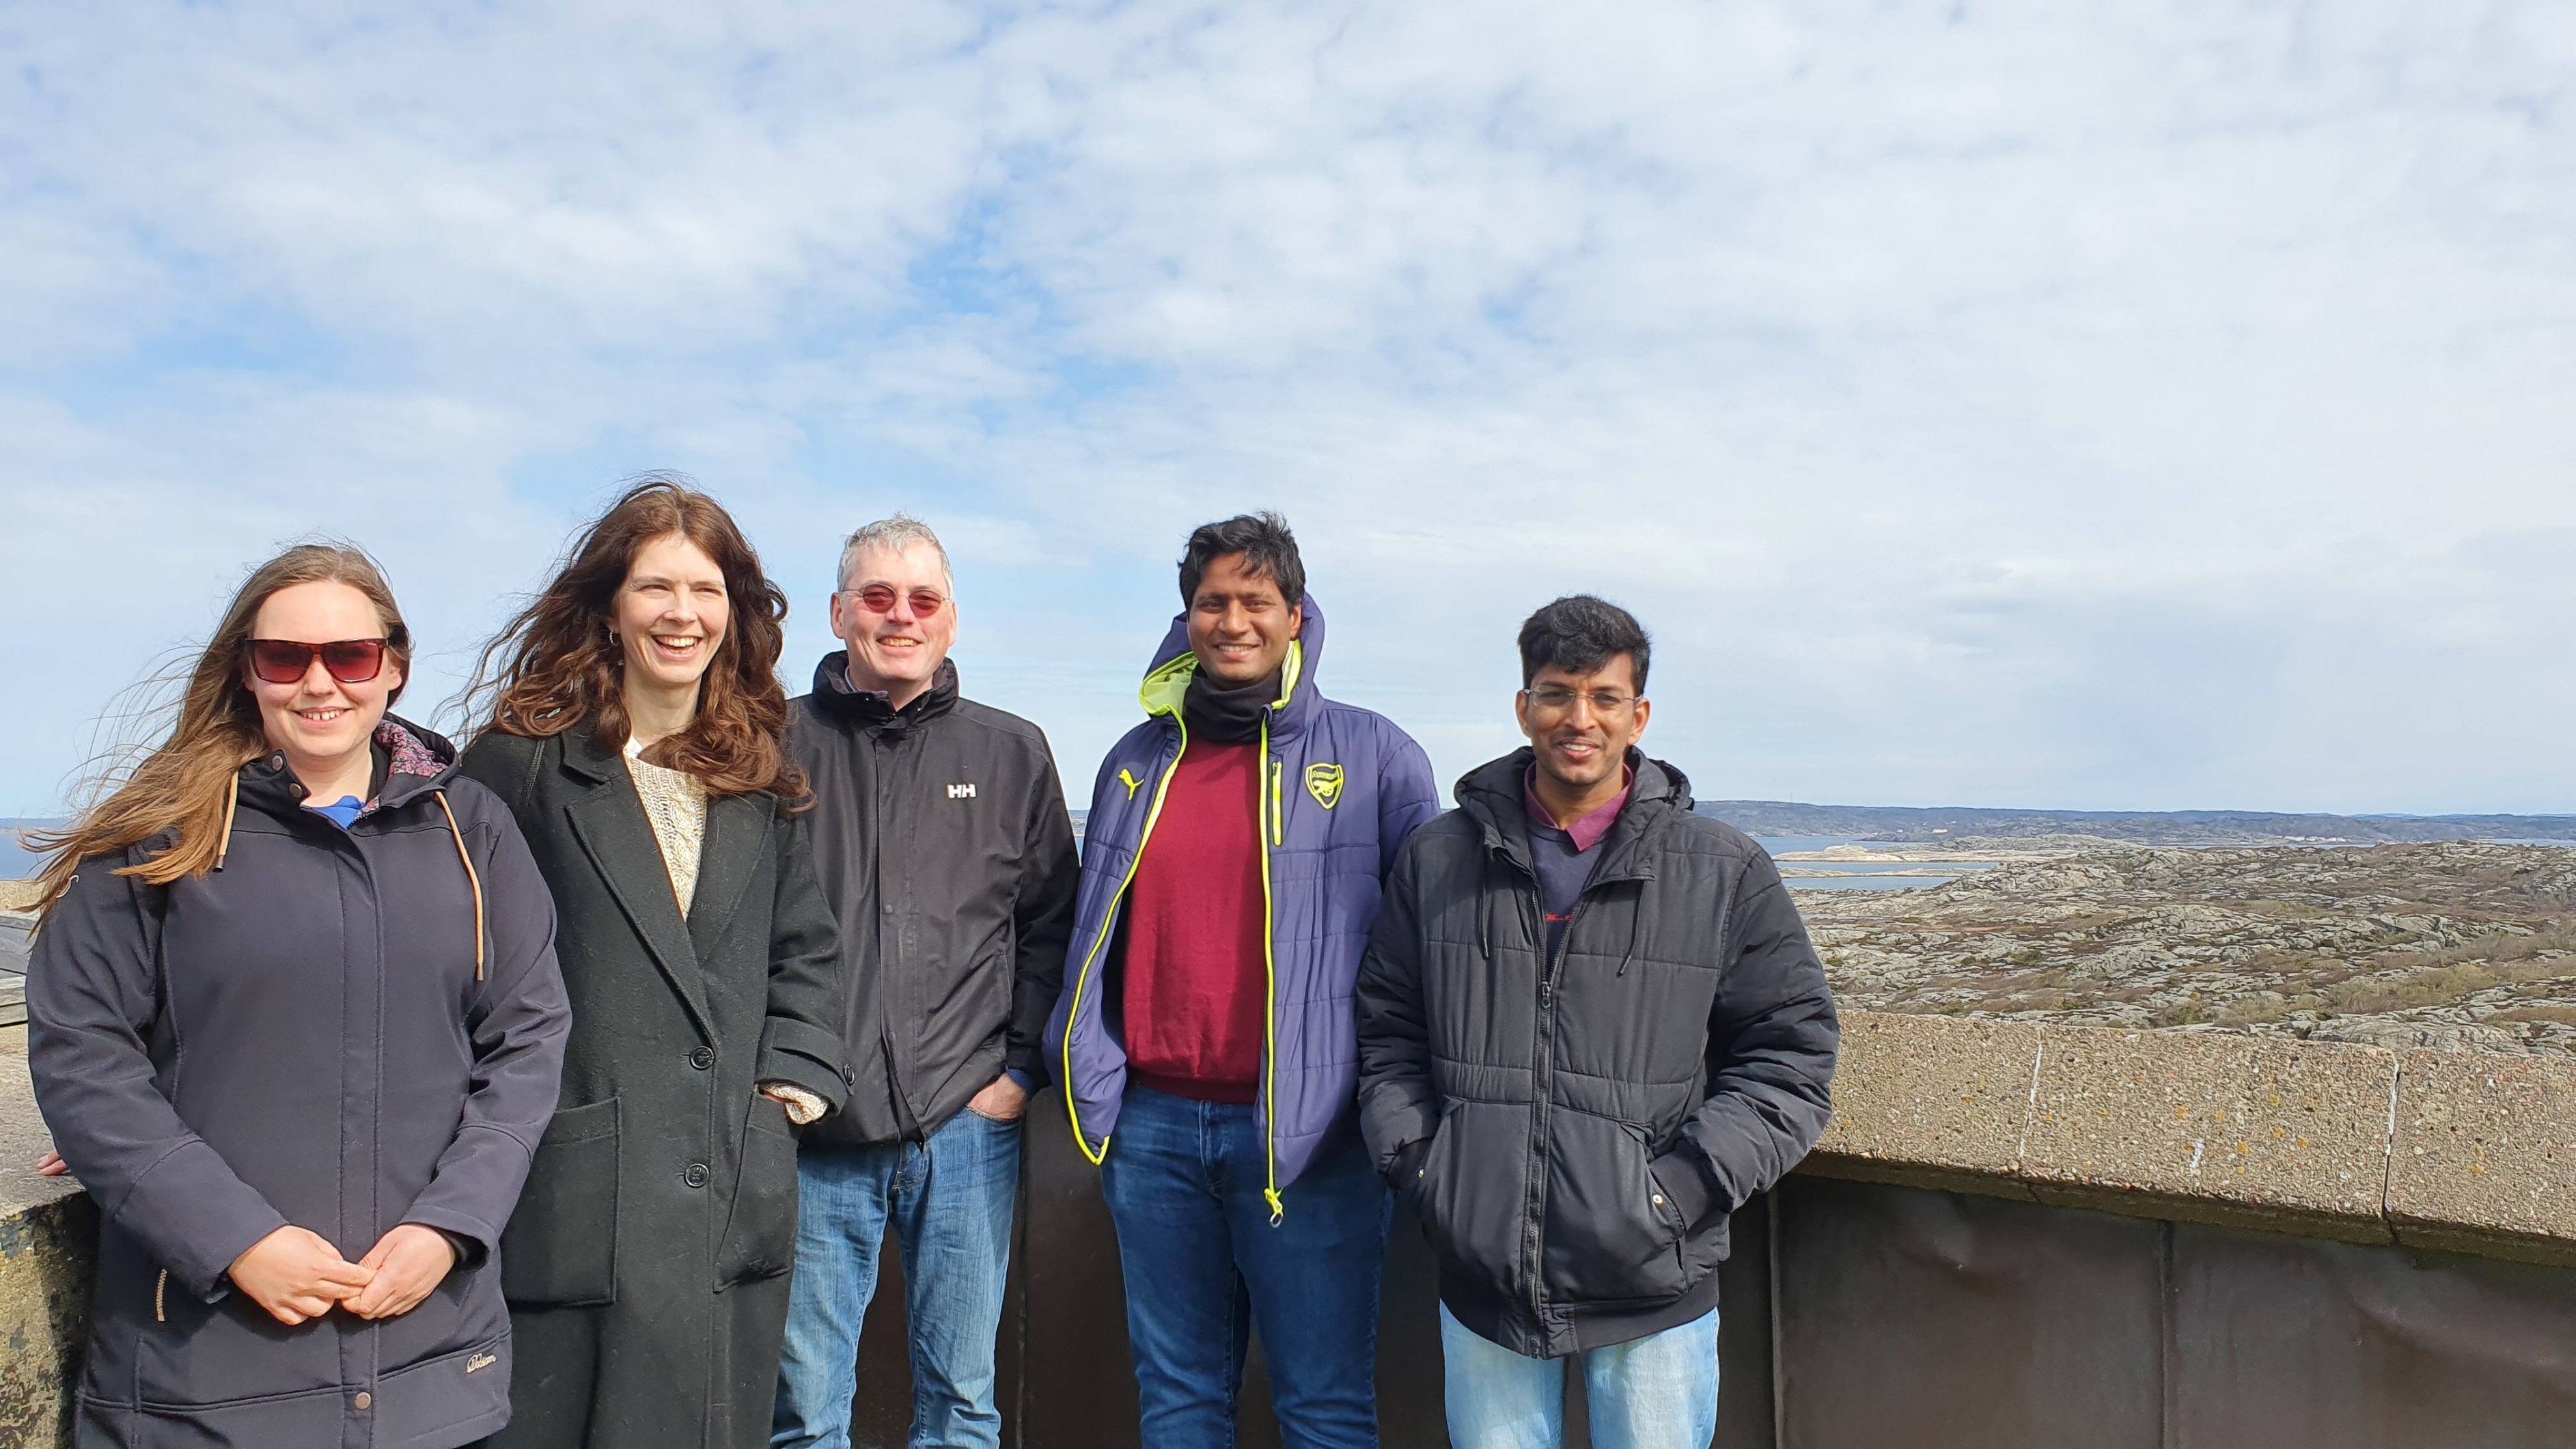 MGM Project Team at Carlsten's fortress. (From left) Emma, Charlotte, Per-Anders, Shareq and Sairam.